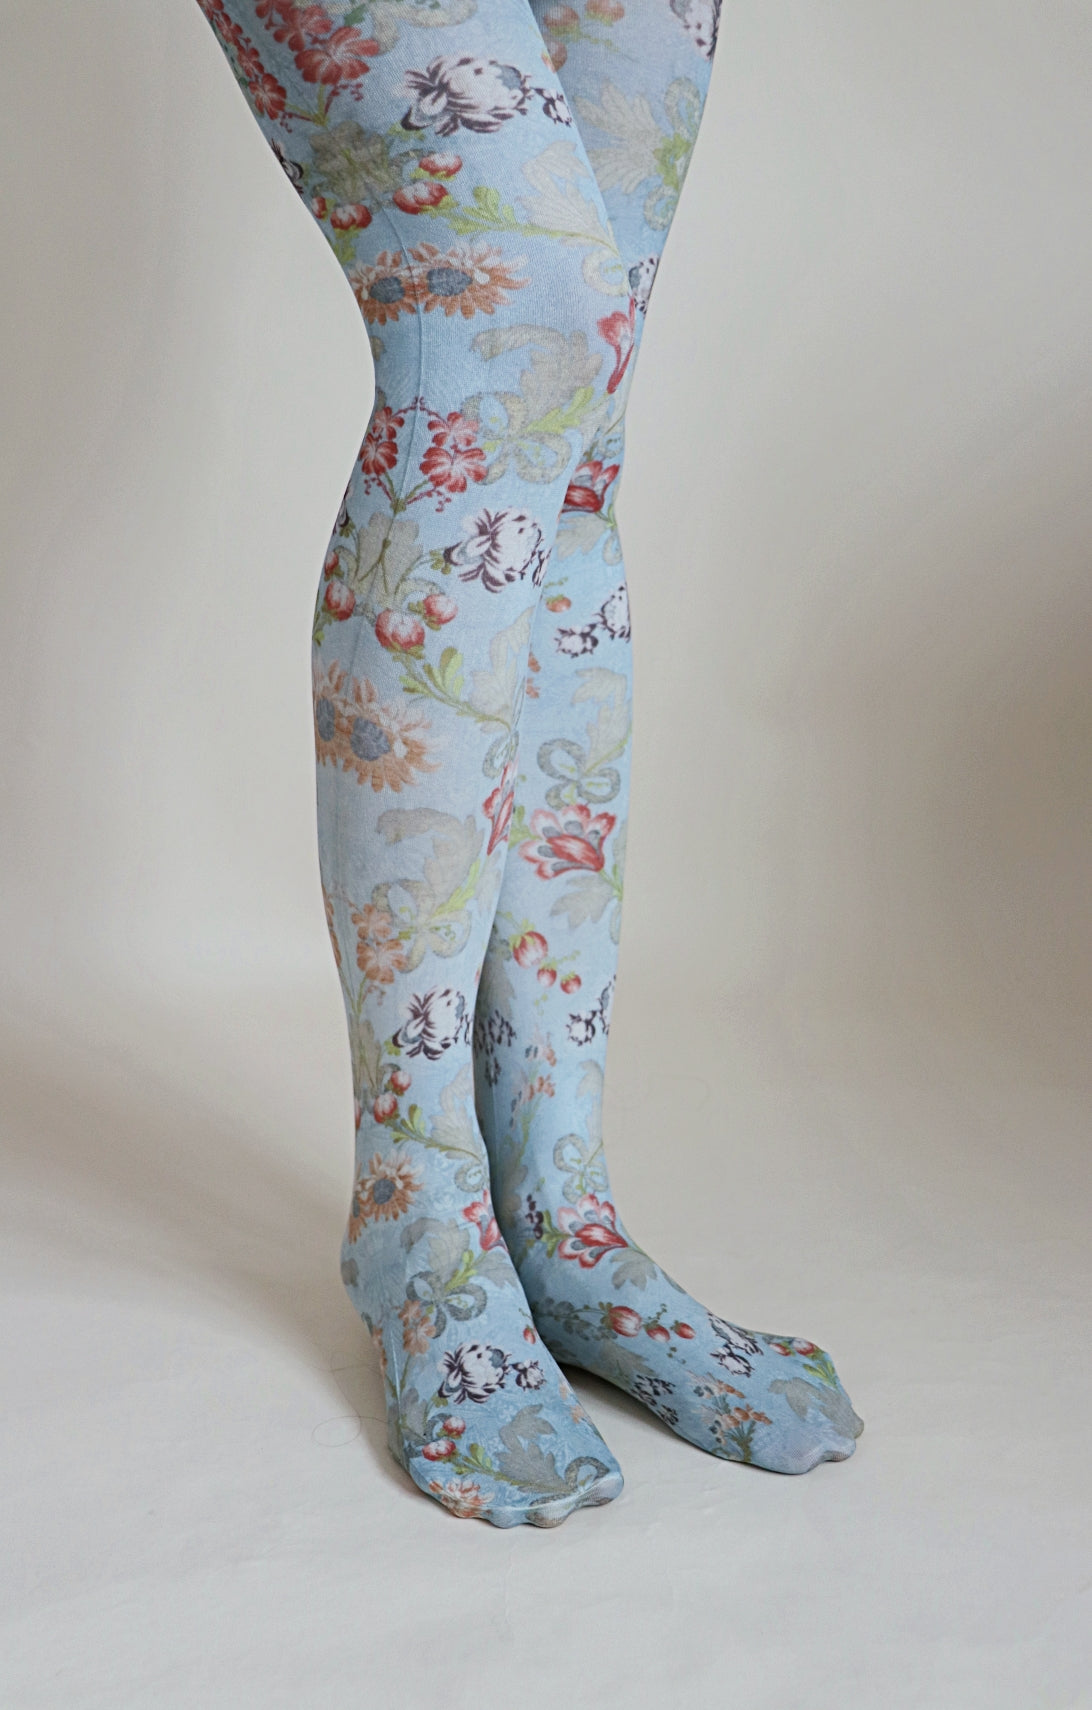 Overall light blue-ish fabric with floral patterns throughout the tights.